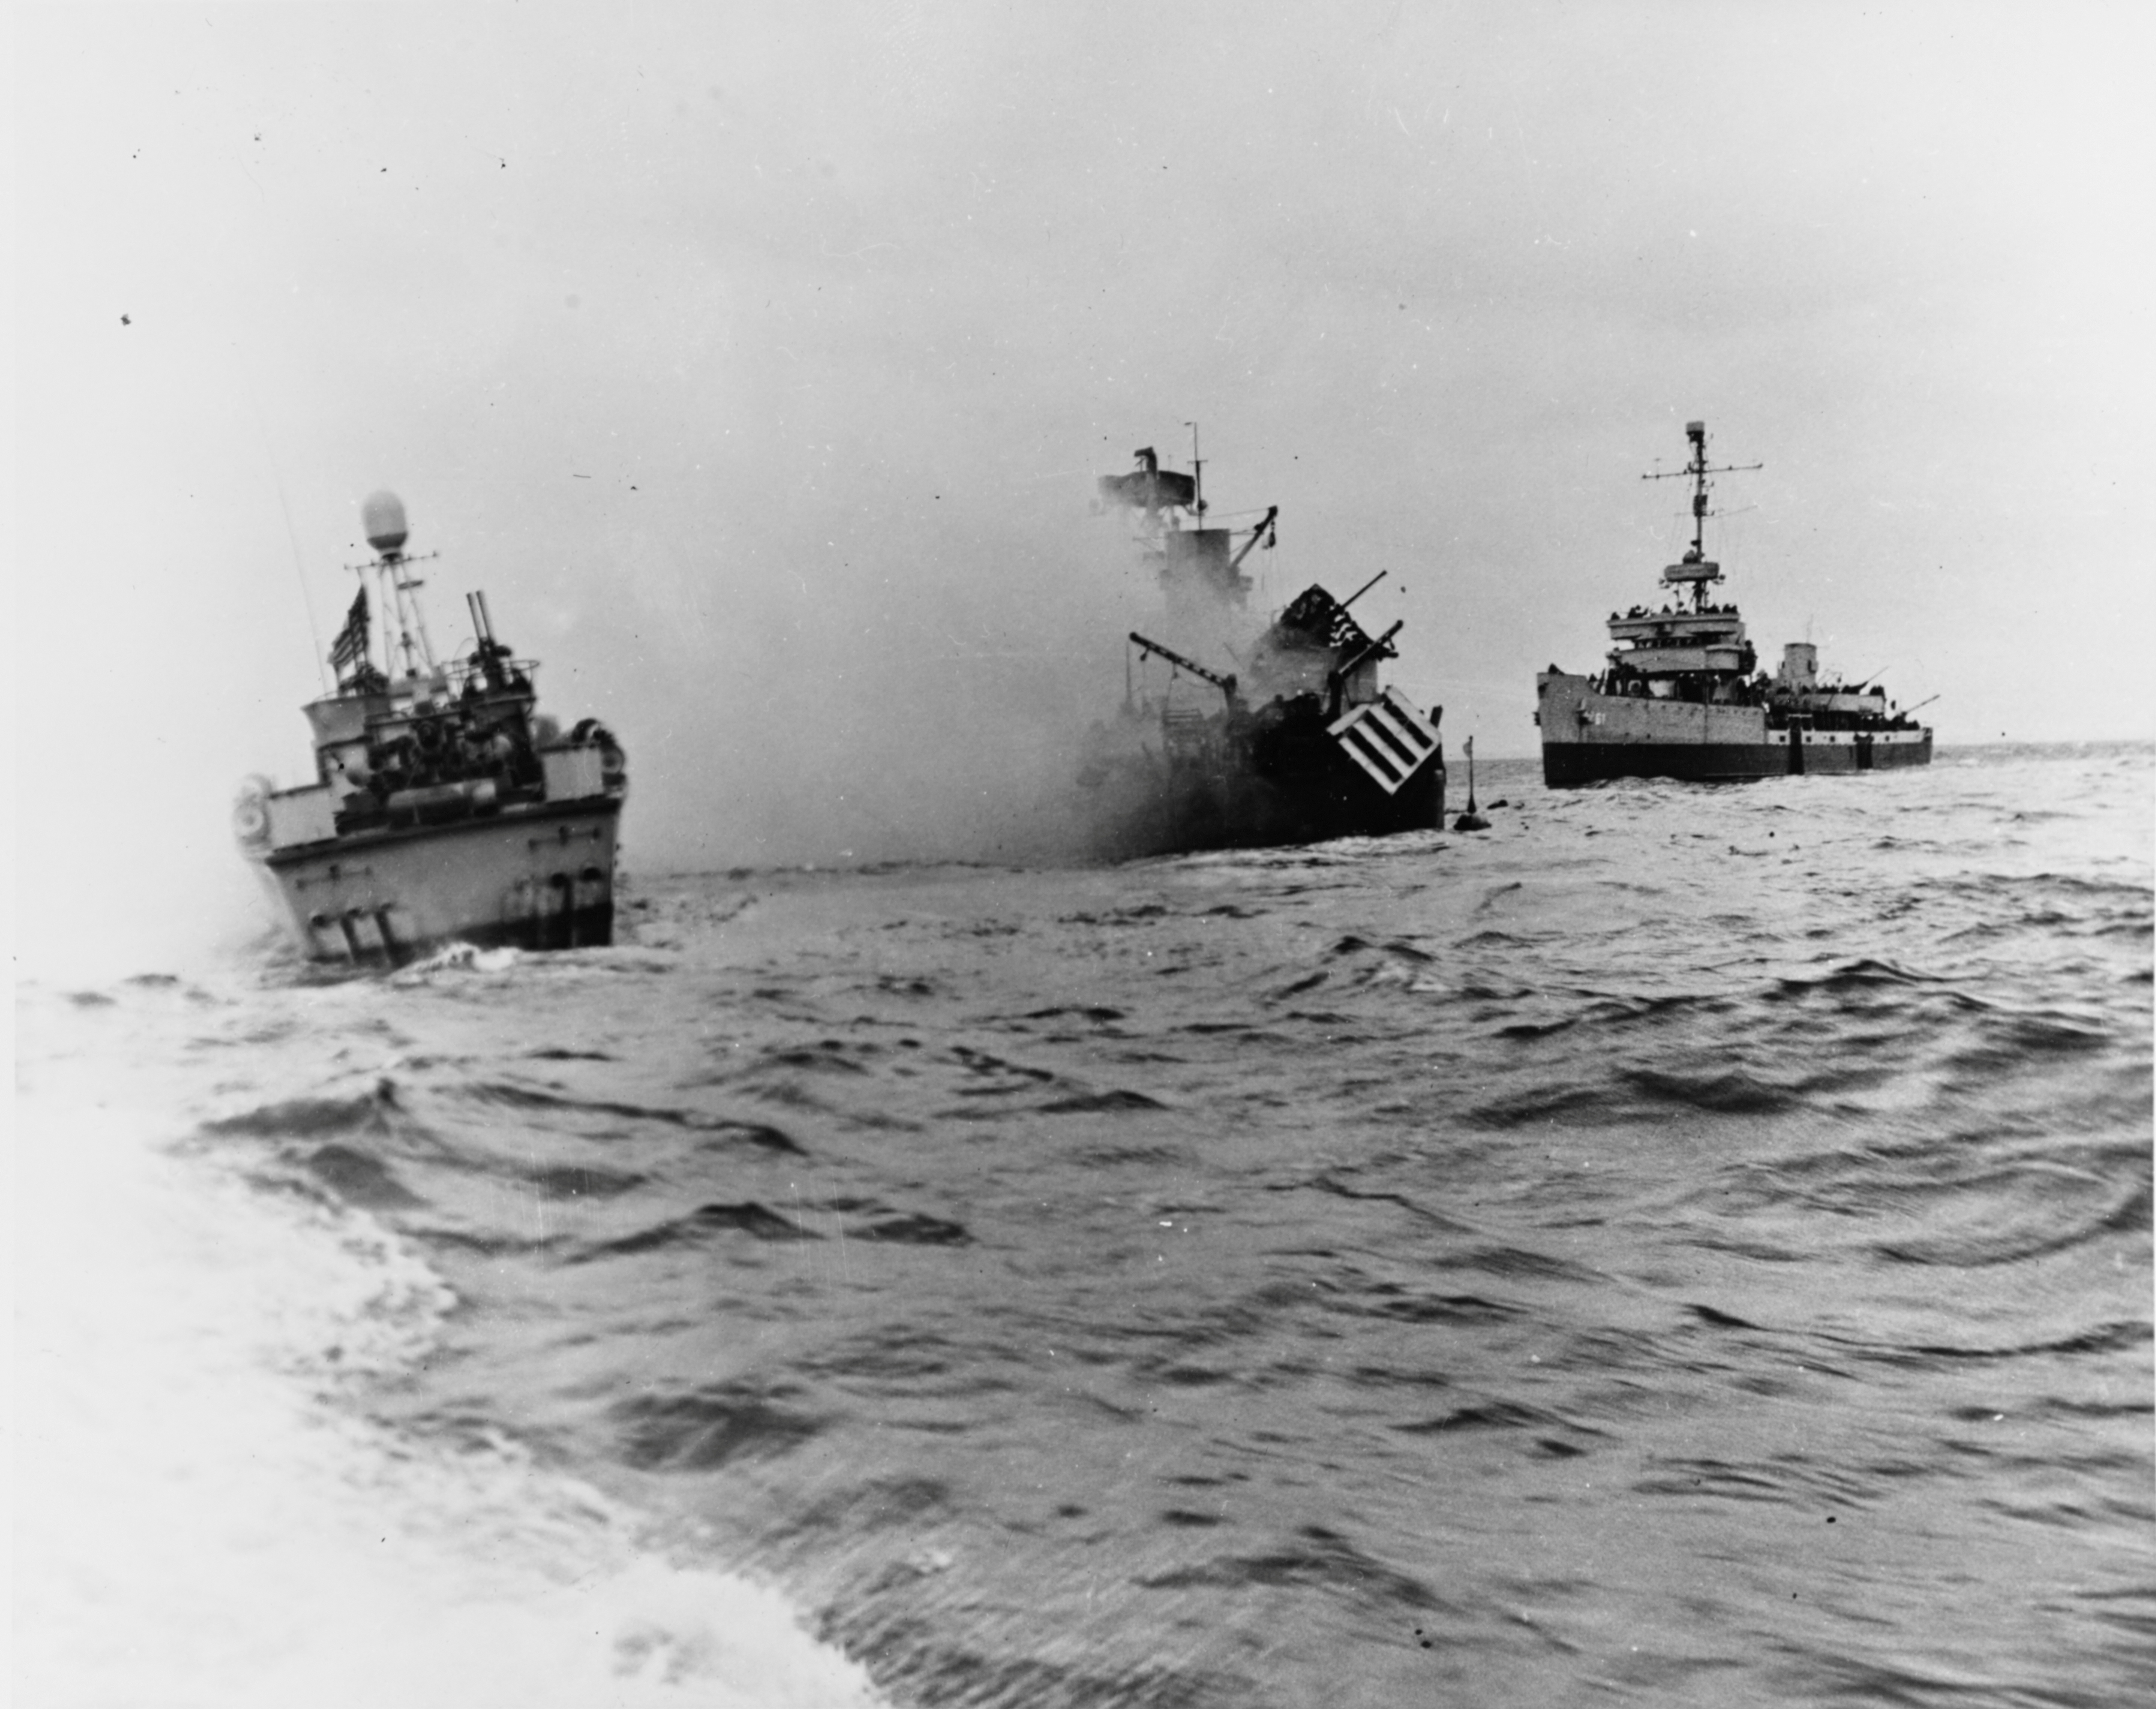 The U.S. Navy minesweeper USS Tide sinks after striking a mine during the D-Day landings on Utah Beach in Normandy